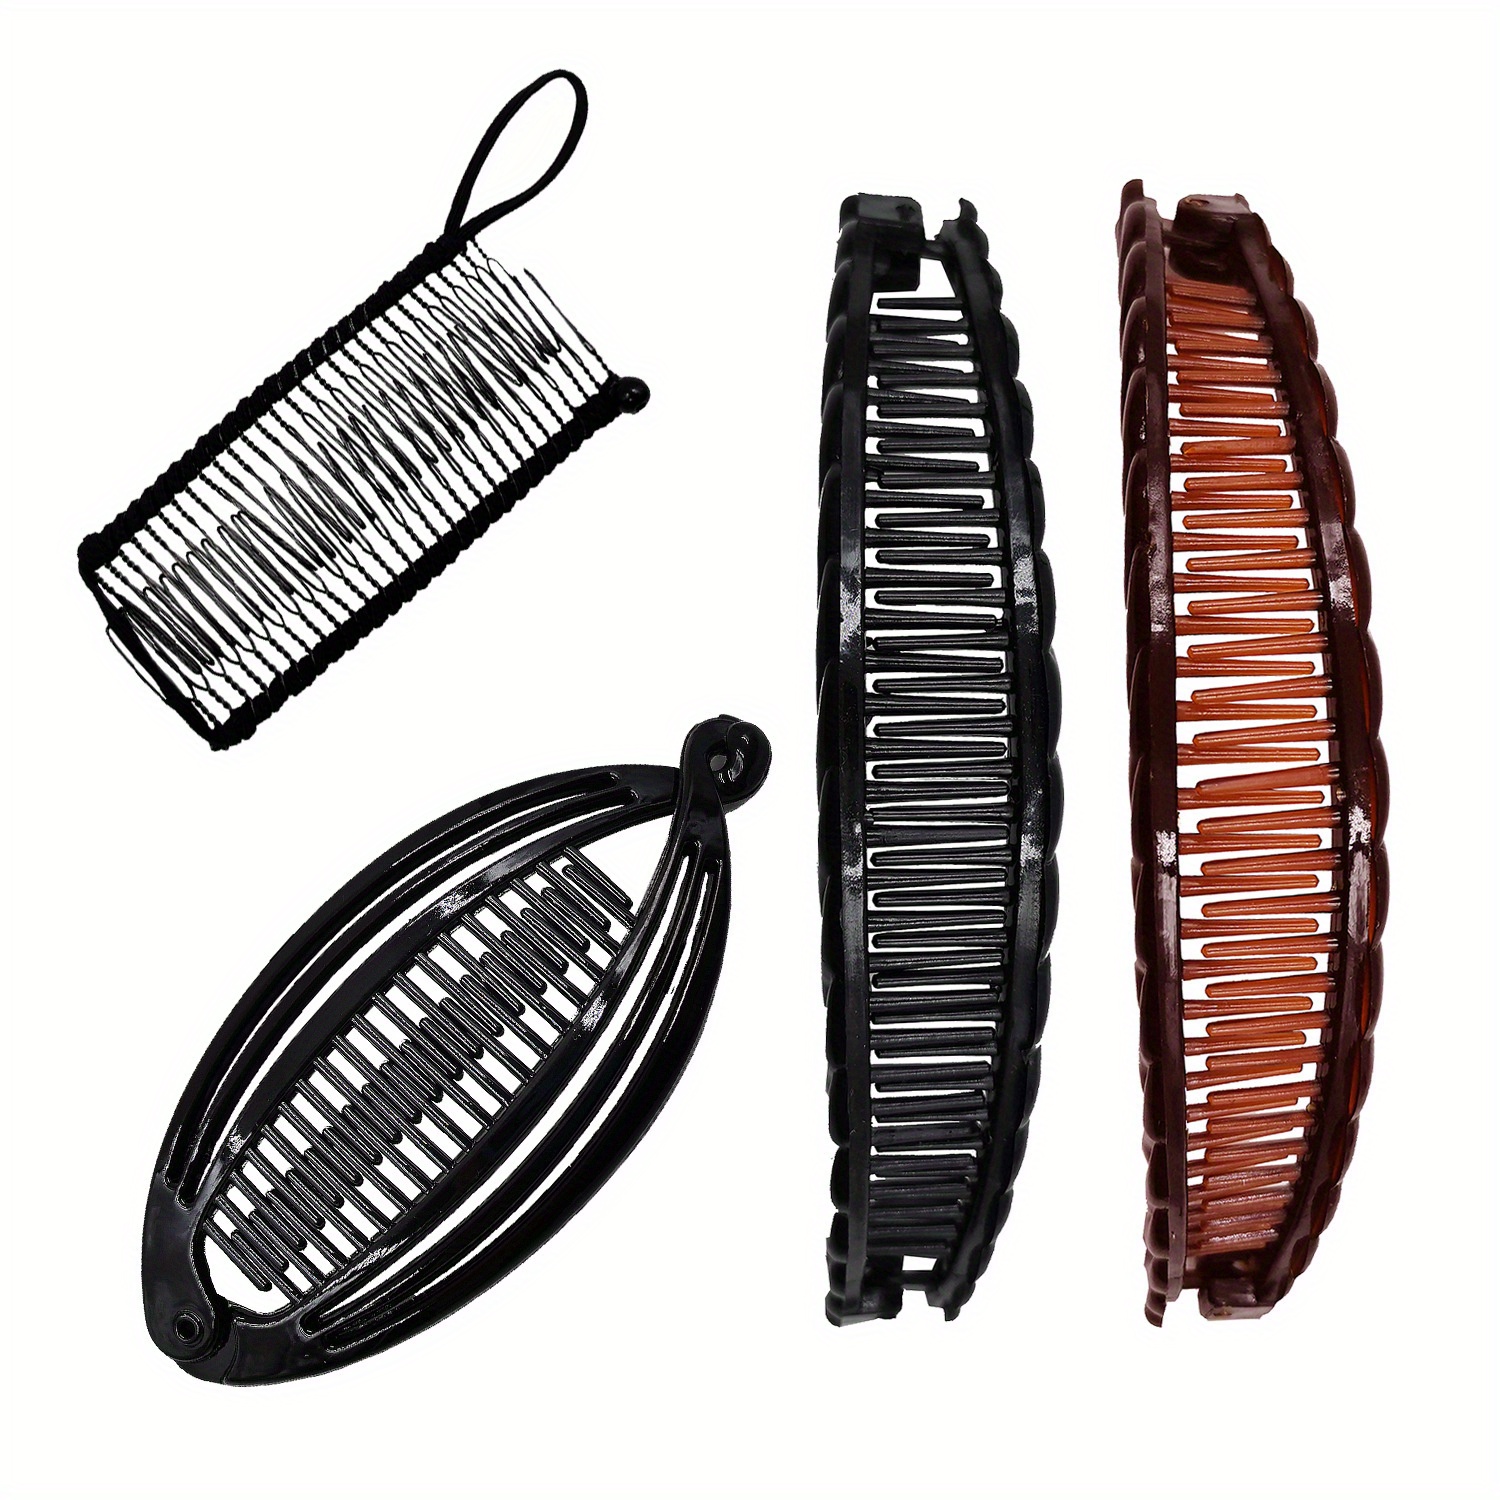 Stretchy Banana Hair Clip Vintage Clincher Comb Tool for Thick Thin Curly  Hair Stretch & Adjust - Decorative Sturdy & Lightweight - No Pressure or